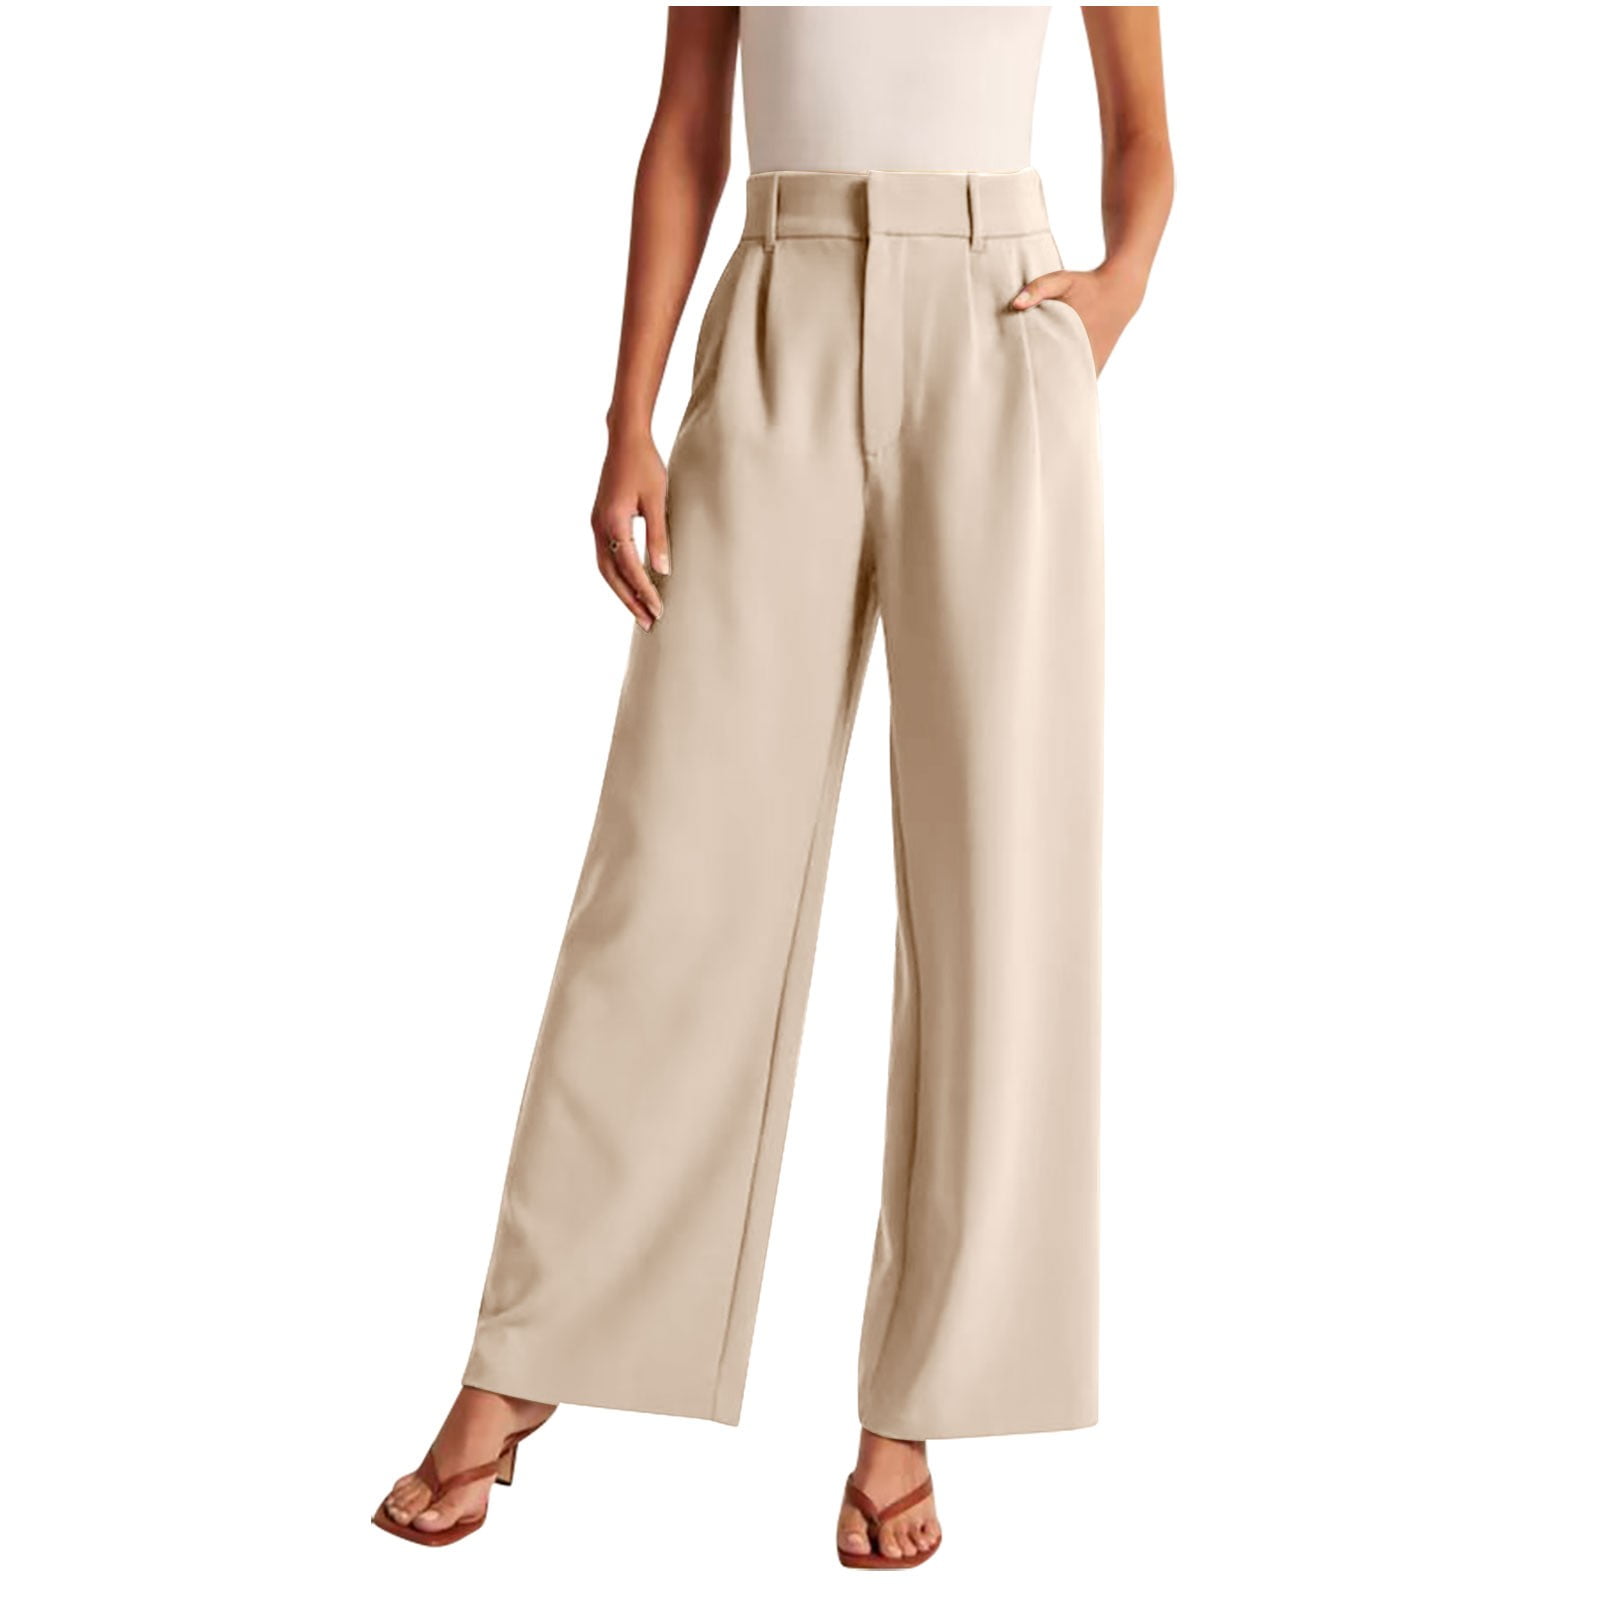 Wide-Leg Pants for Women - Sumissura